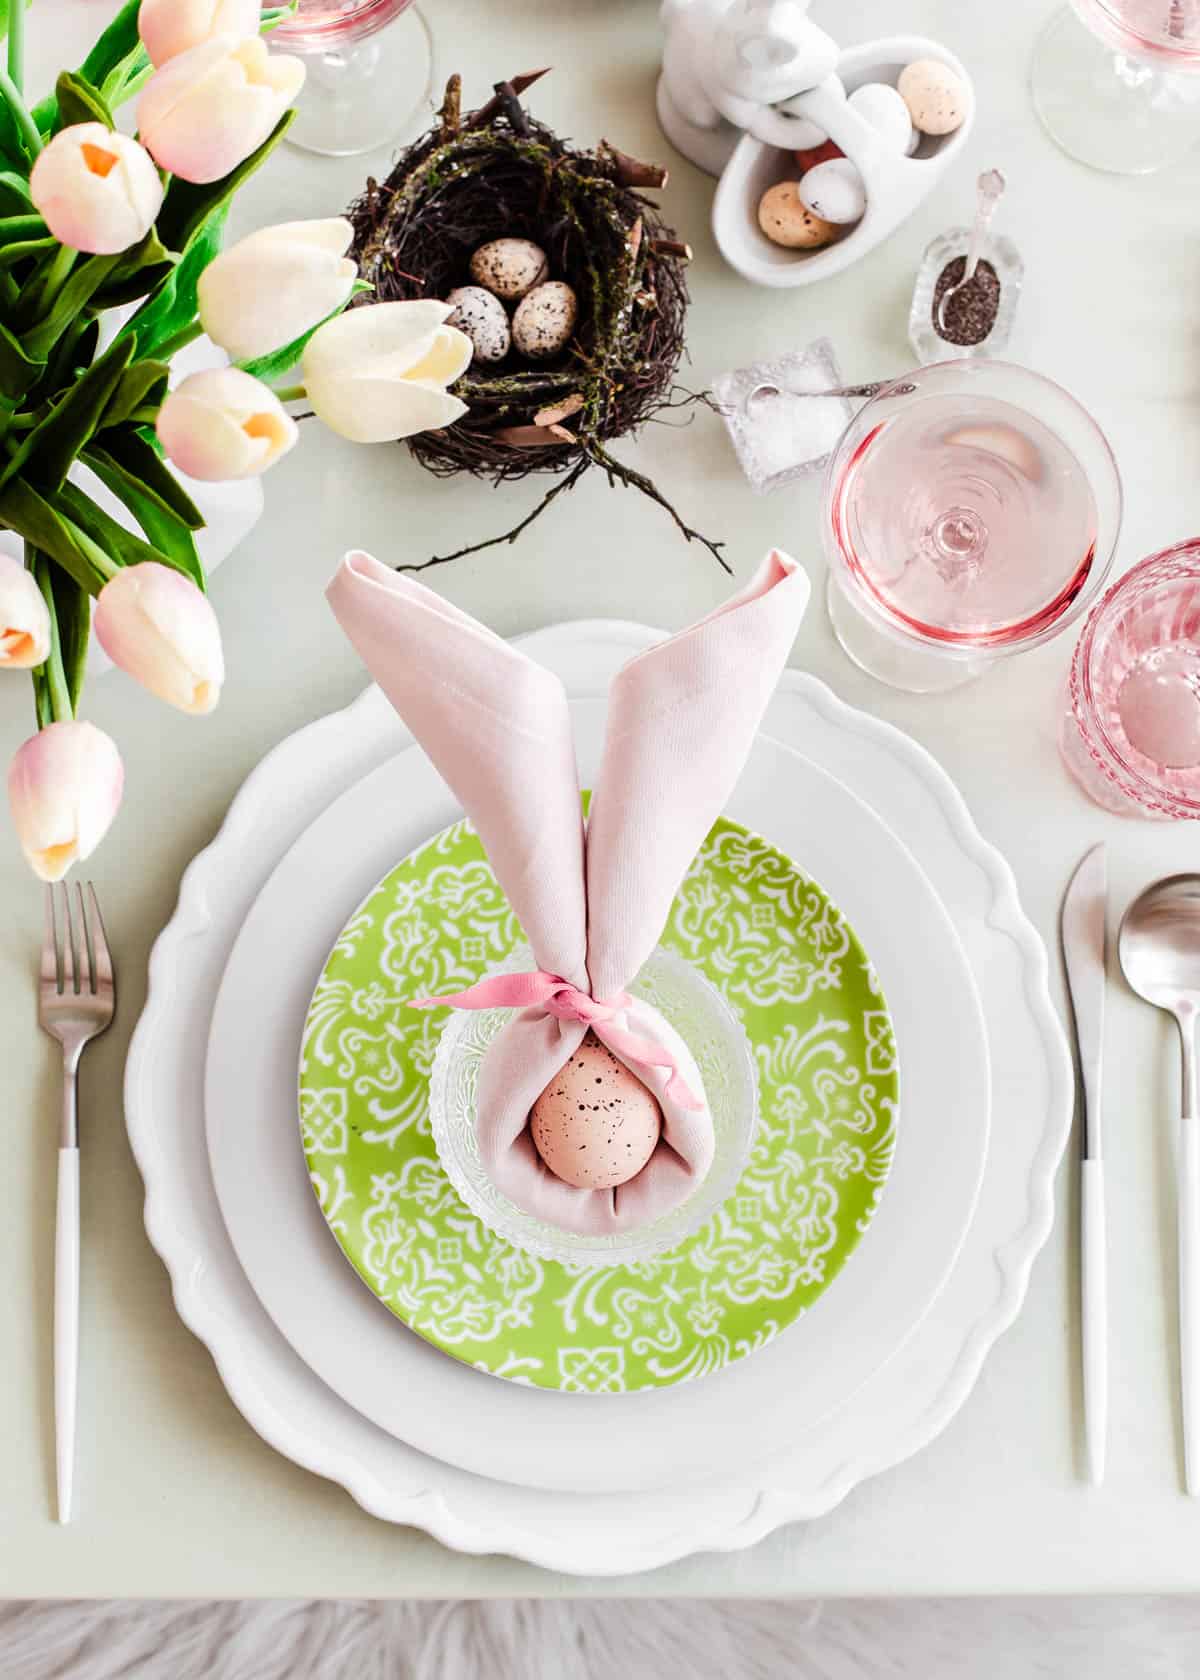 pink and green Easter table setting with napkin folded like bunny ears.